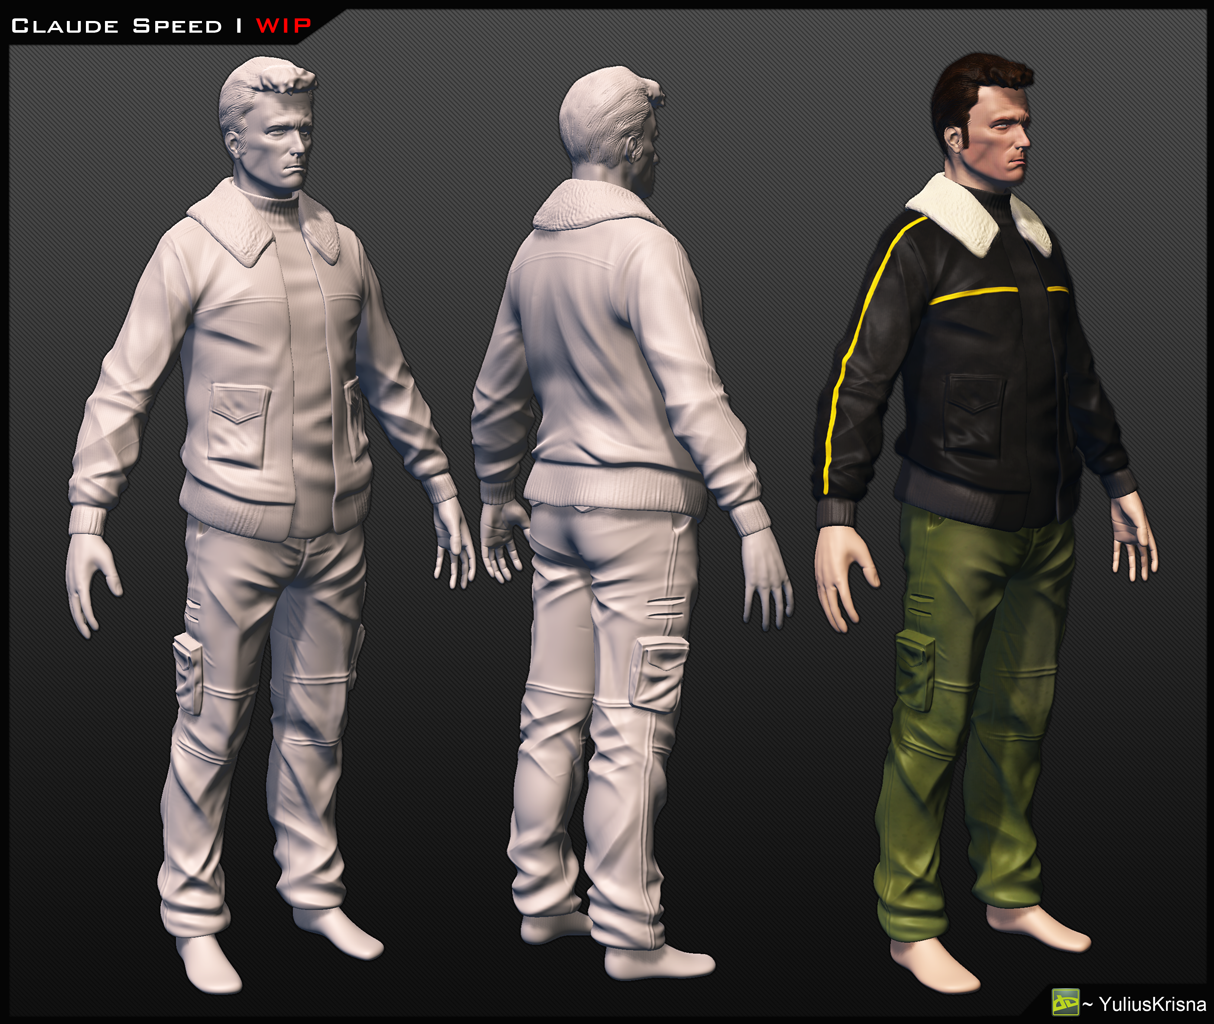 _wip_3__claude_speed_by_yuliuskrisna-d5tfxz6.png